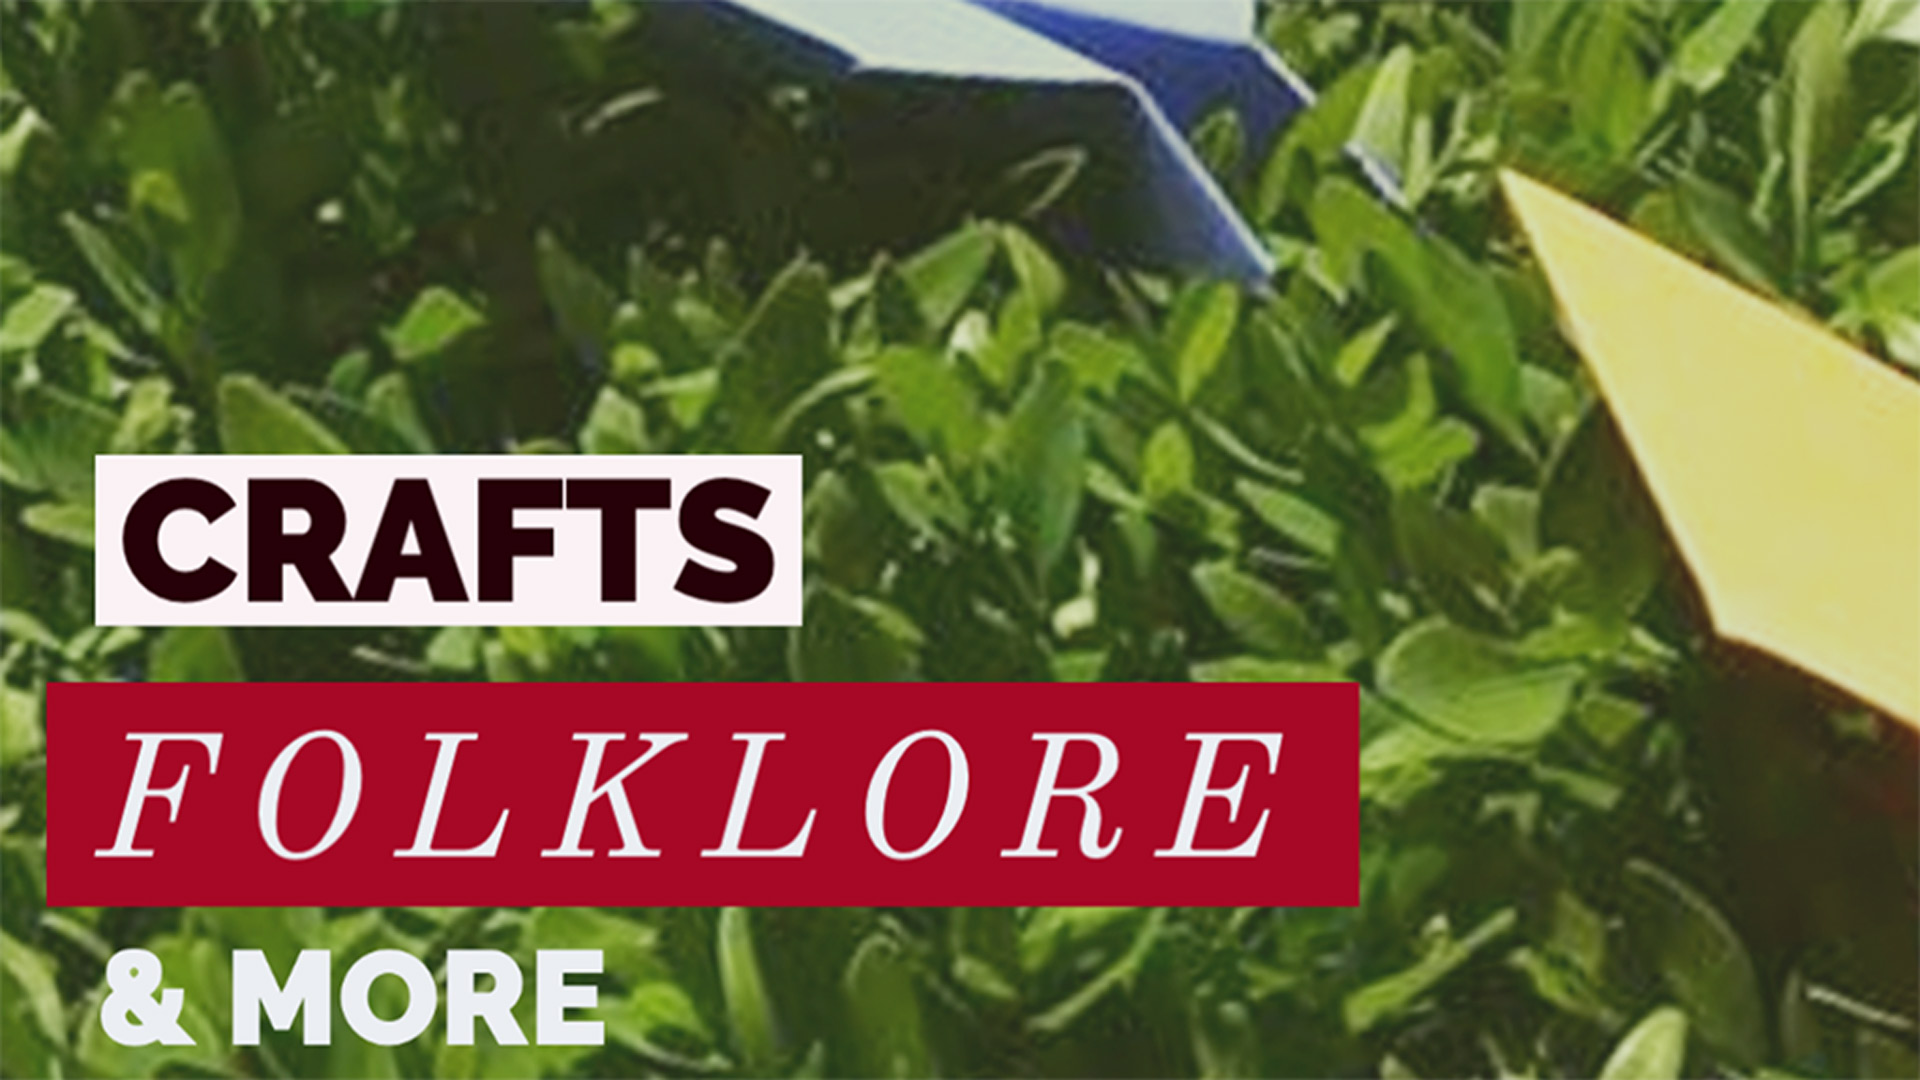 Crafts Folklore and More logo on greenery backdrop